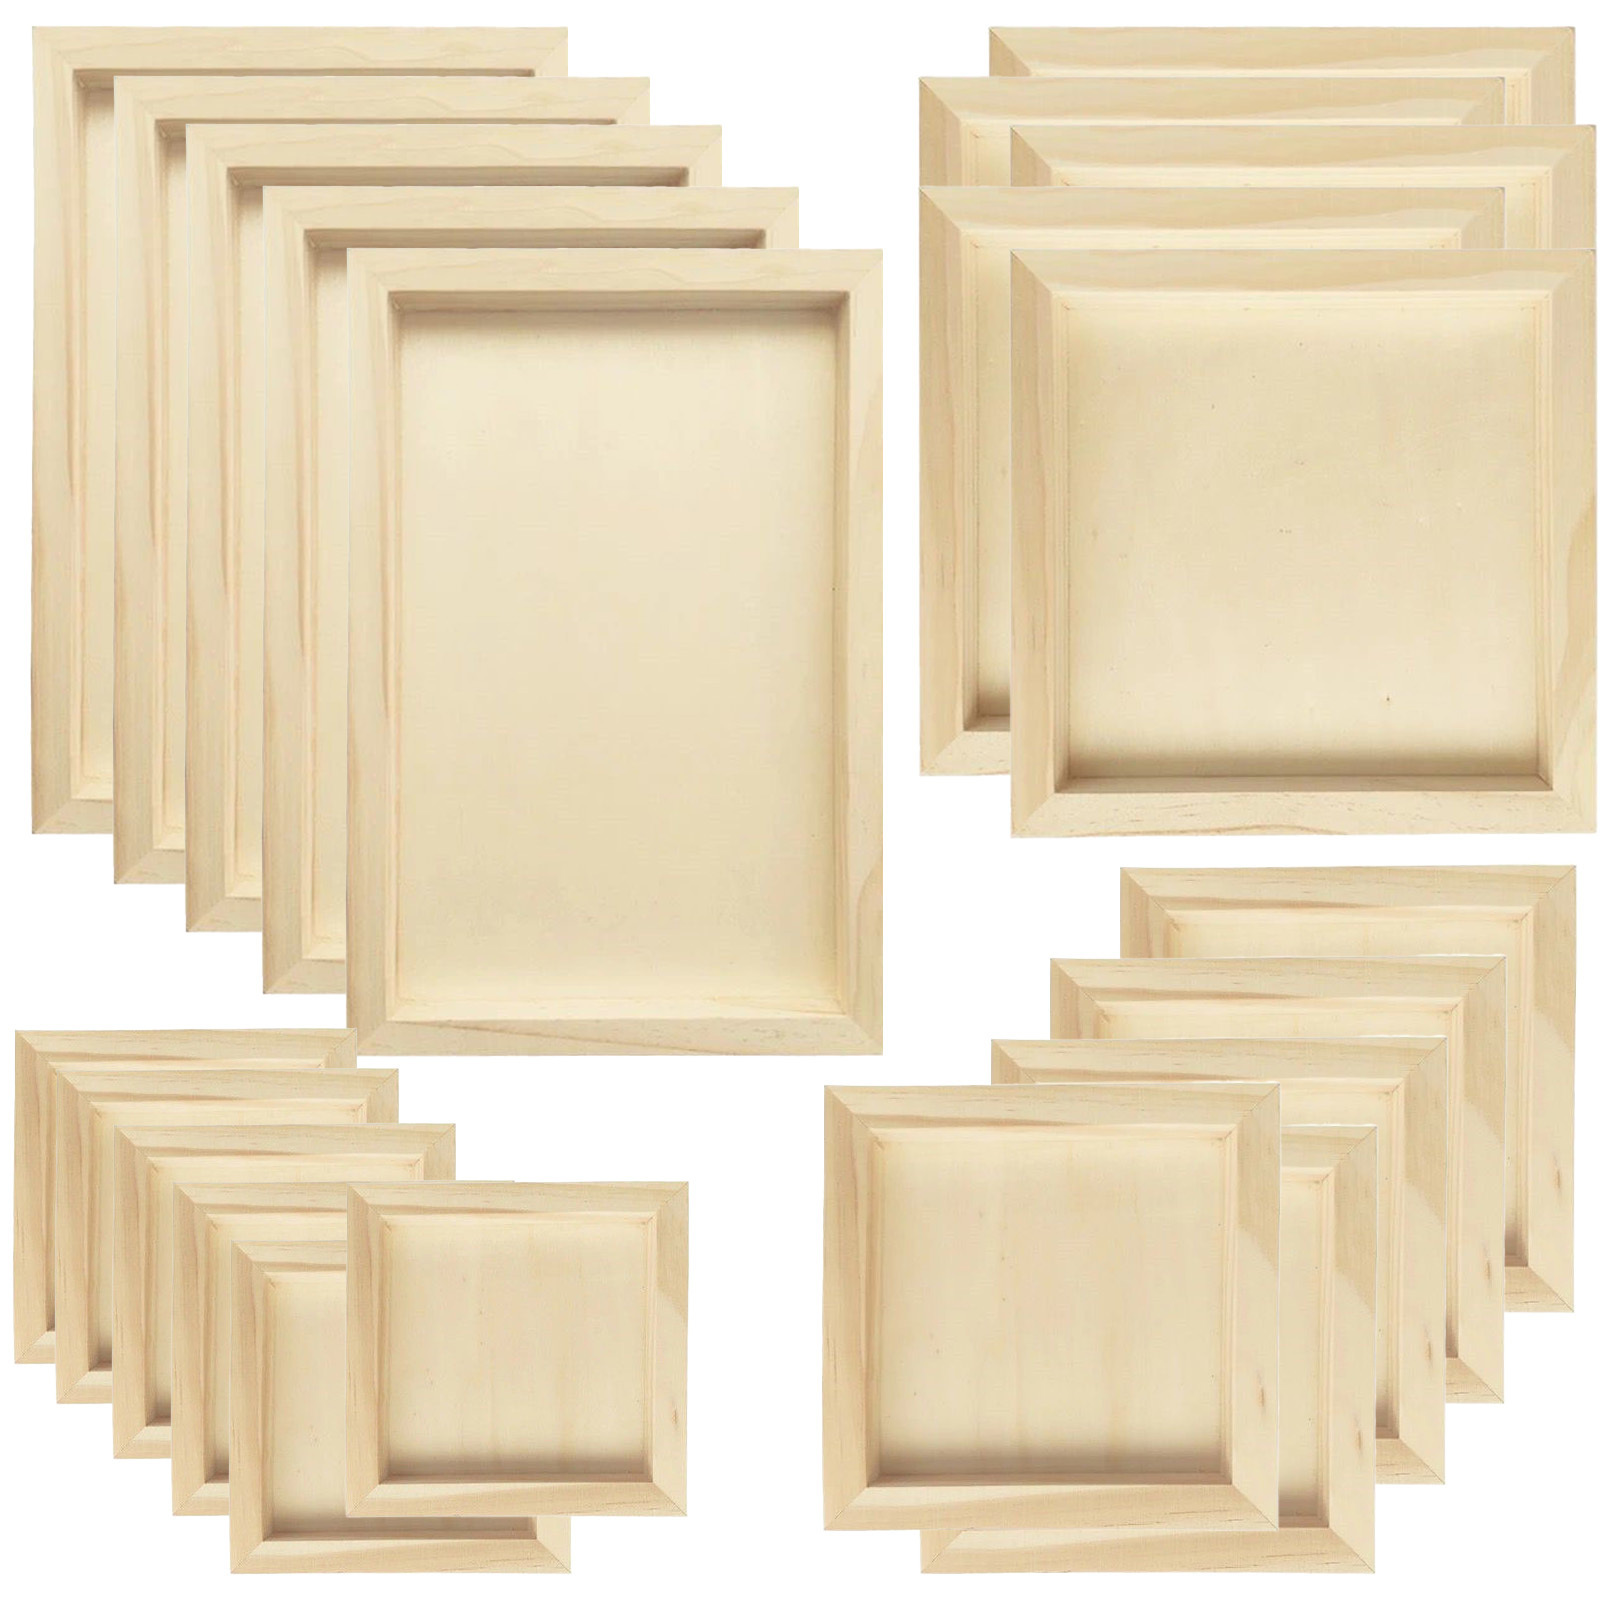 

10pcs Wood Panel Boards, 5x5in/6x6in/8x8in/12x9in Unfinished Wood Canvas Wooden For Crafts, Painting Canvas, Diy Art Projects, Pouring, Arts Use With Oils, Acrylics